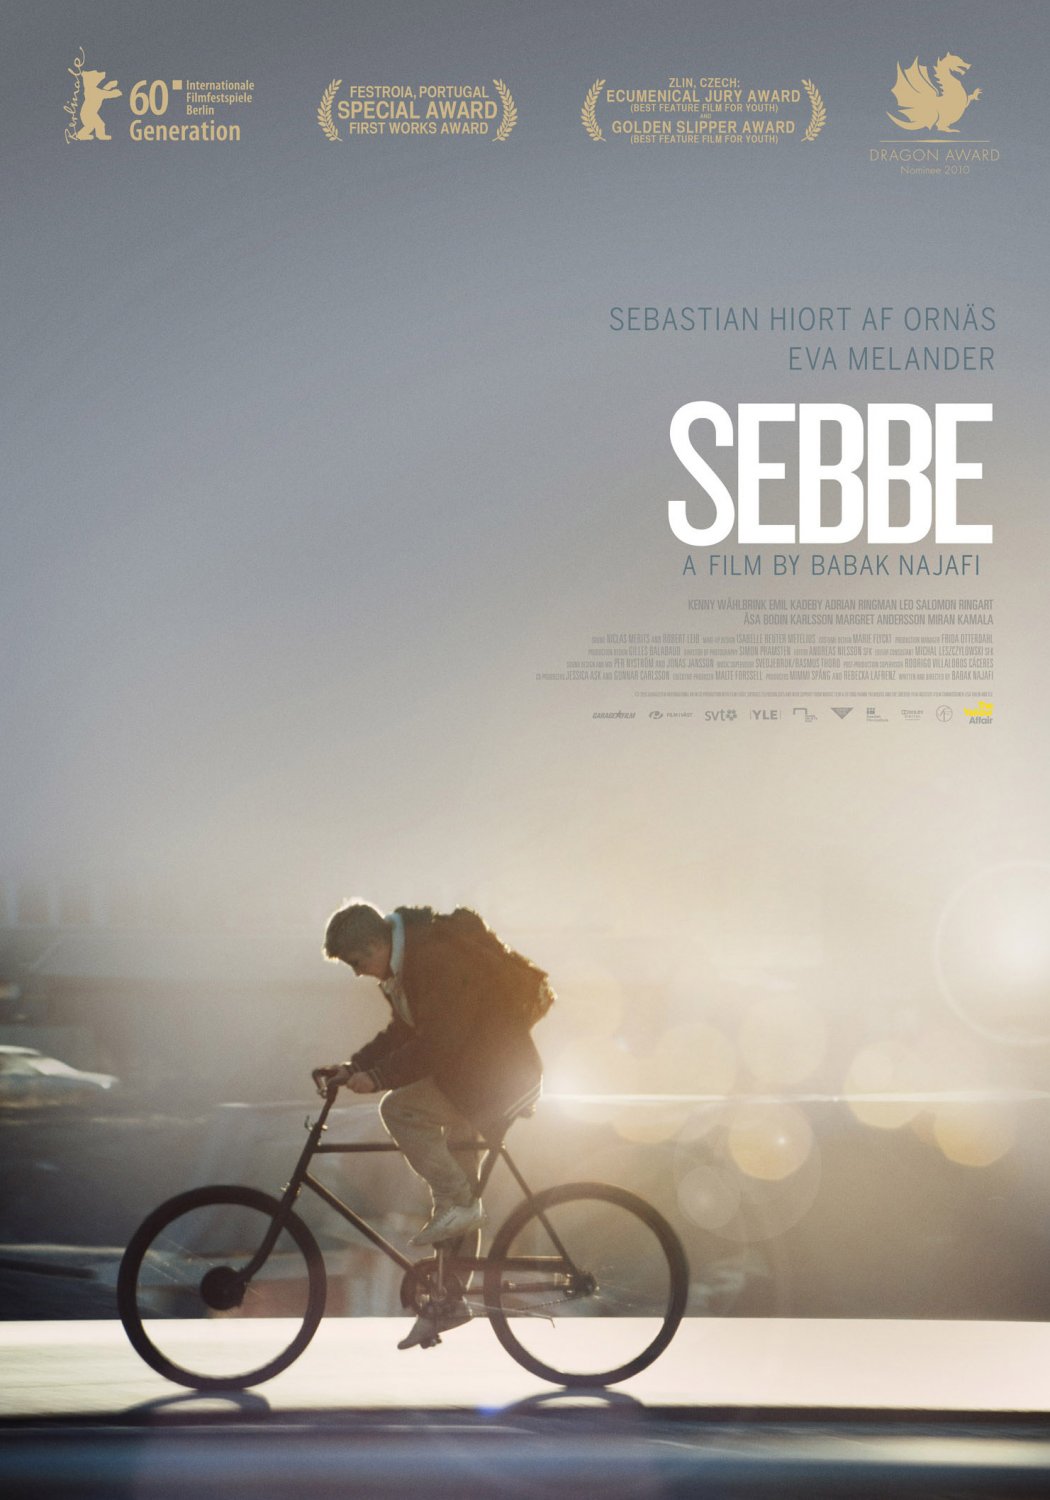 Extra Large Movie Poster Image for Sebbe 